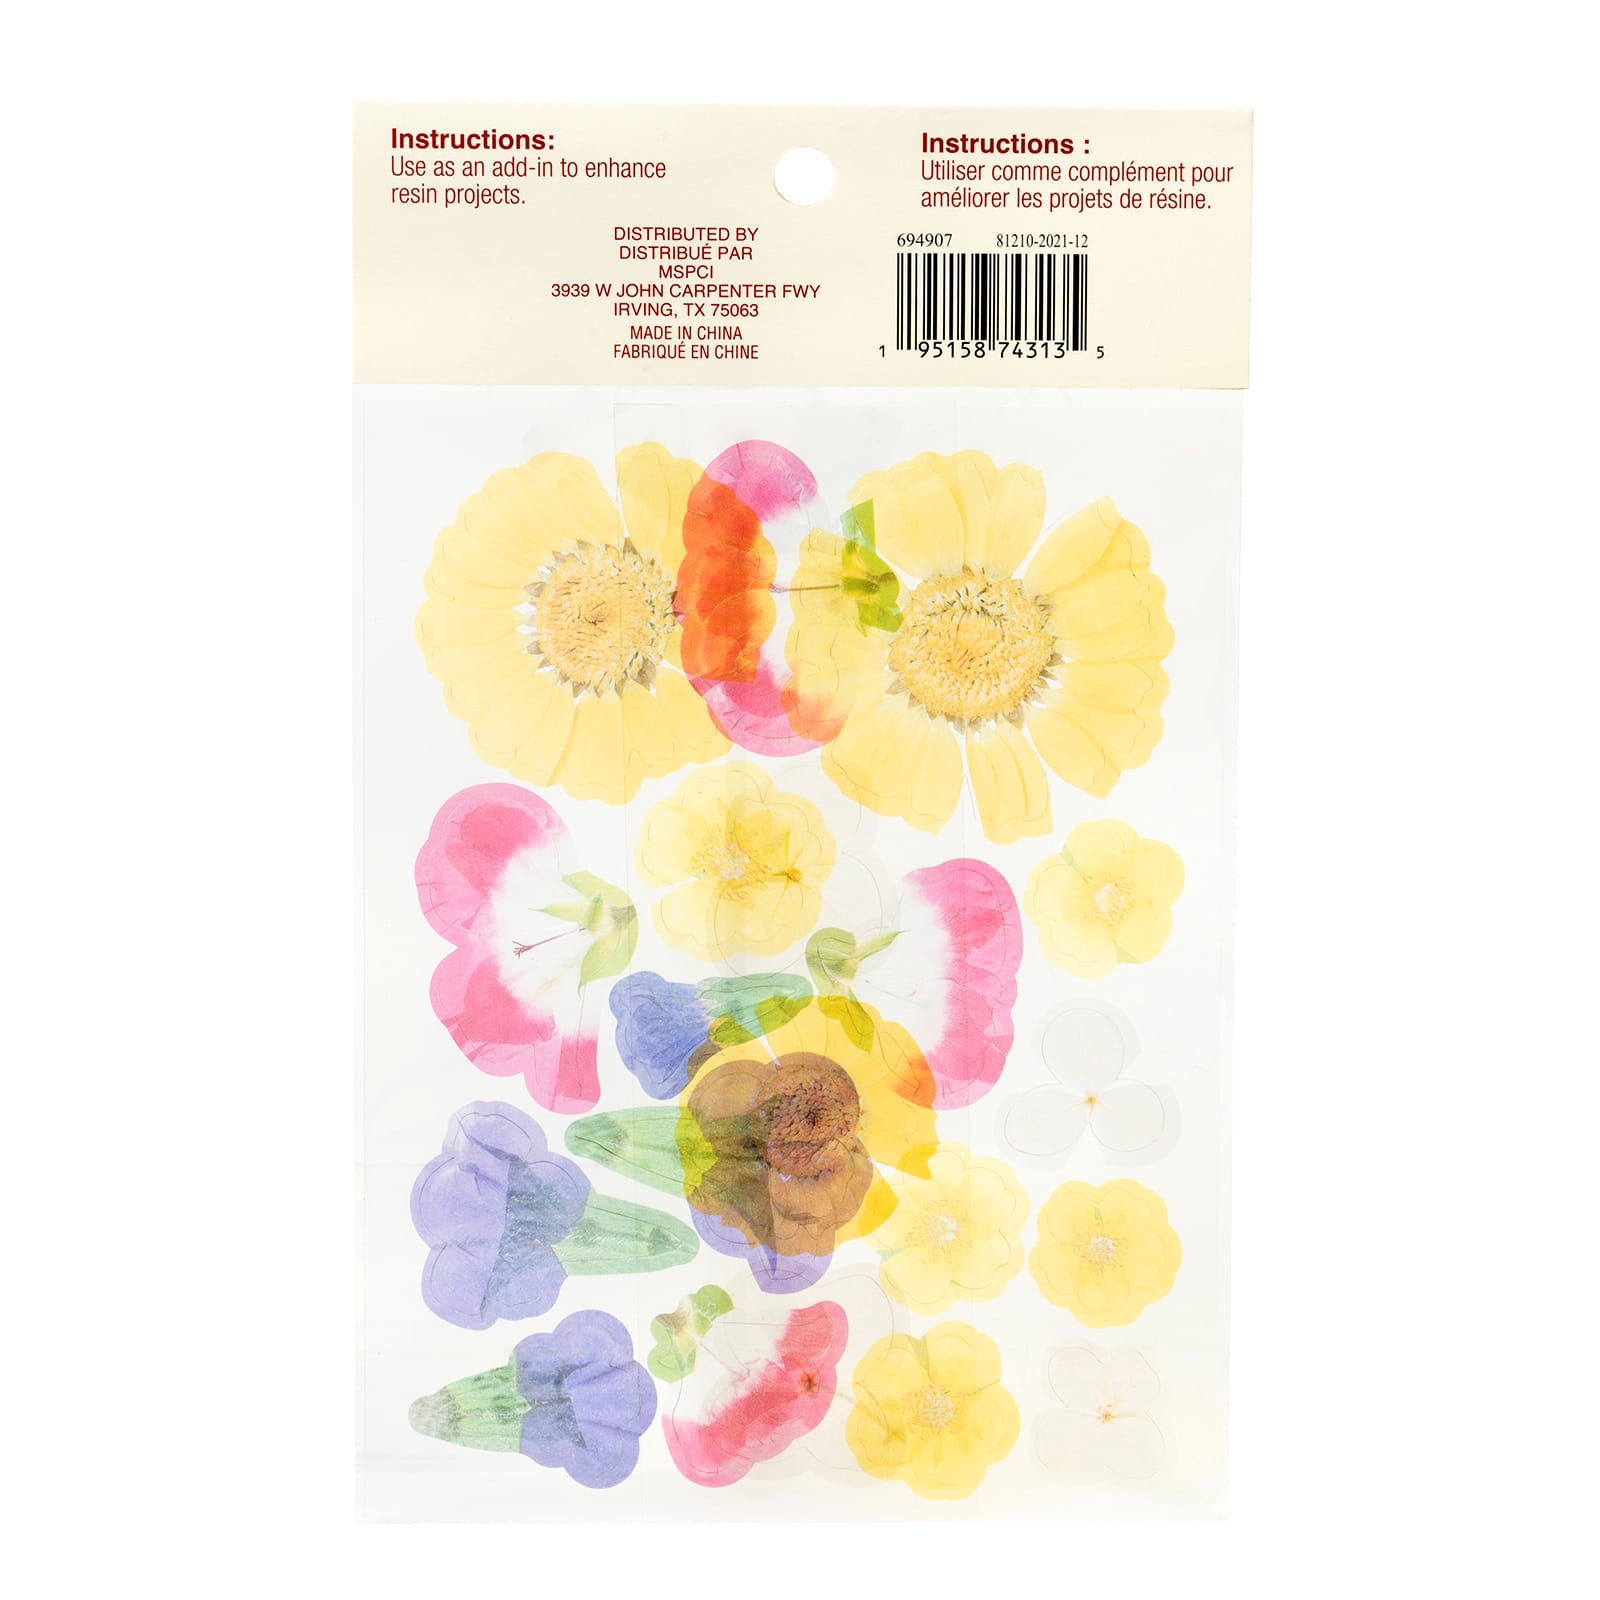 Flowers Acetate Pieces by Craft Smart&#xAE;